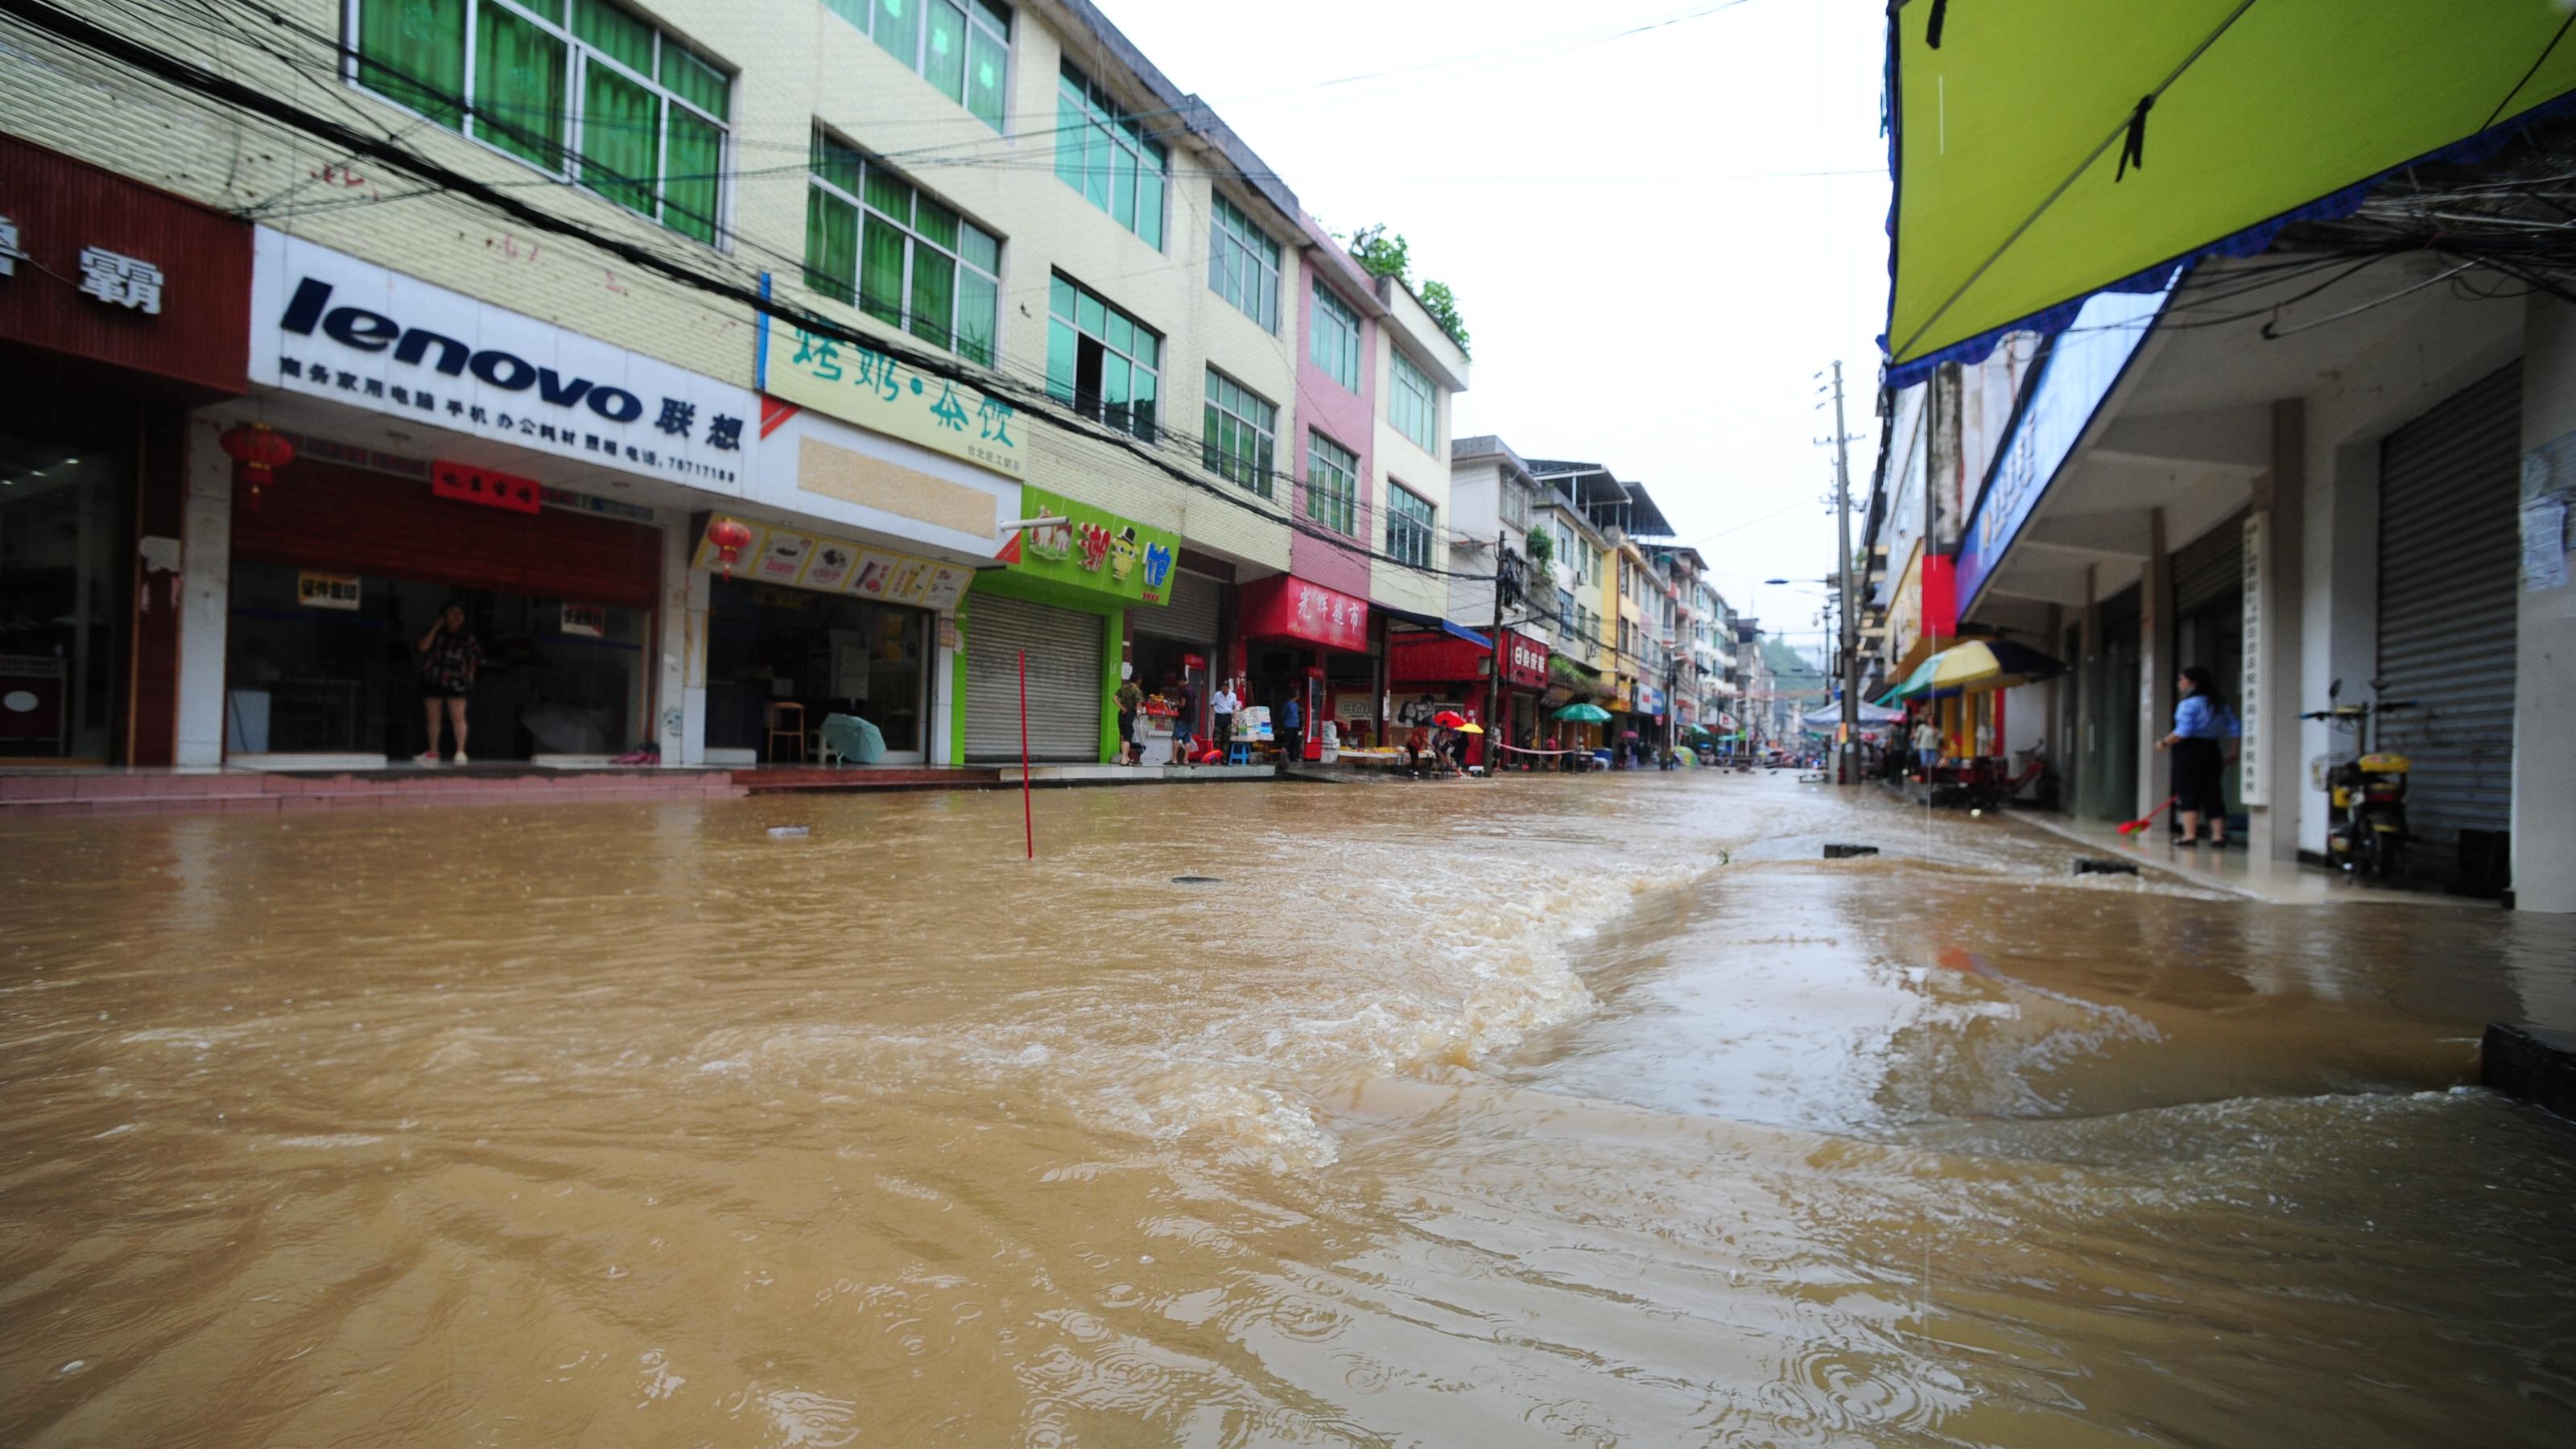 After days of rainstorm, Dingshi town was partially flooded, cornfields and main roads have been damaged, Youyang County of Chongqing, China, 22 June, 2020.Pictured: GV,General ViewRef: SPL5173142 220620 NON-EXCLUSIVEPicture by: SplashNews.comSplash 